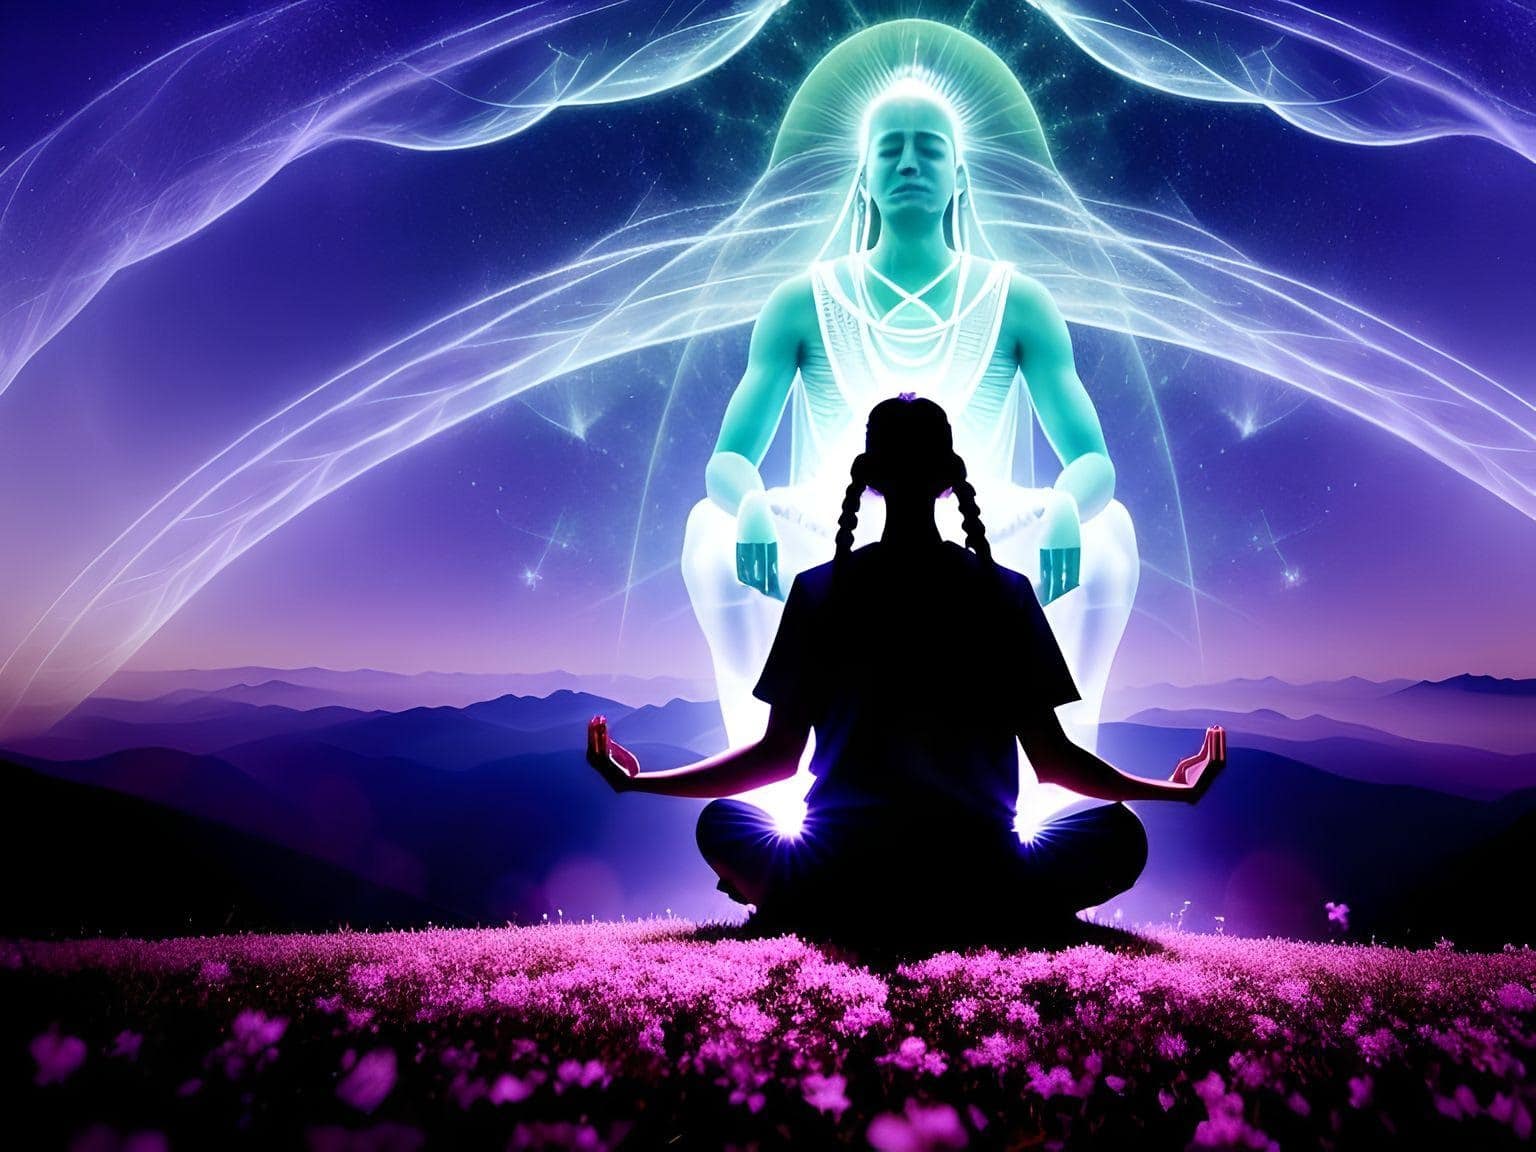 An image depicting a person sitting in meditation while surrounded by ethereal beings, symbolizing spirit guides.